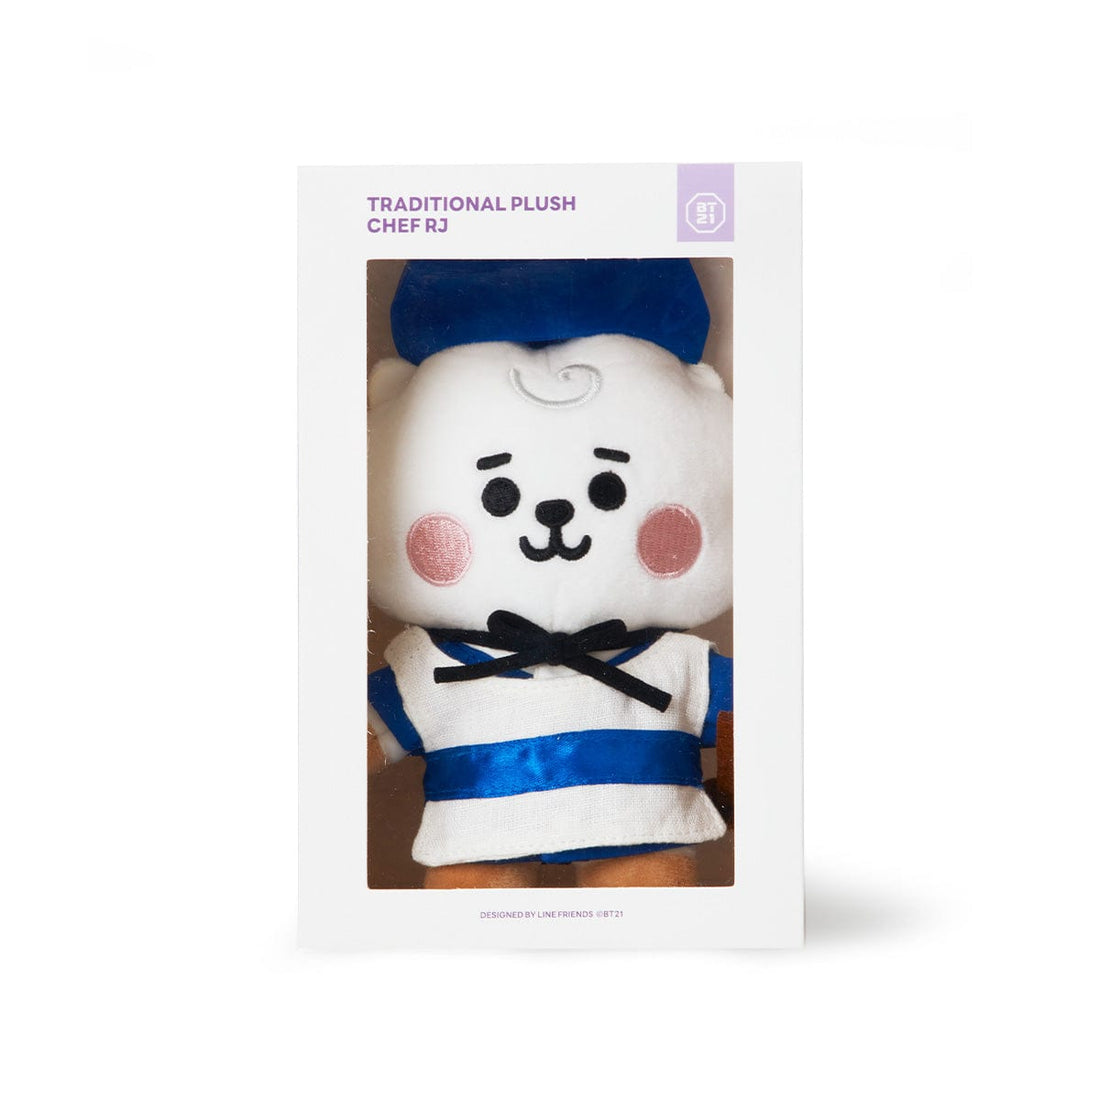 LINE FRIENDS TOYS RJ BT21 RJ BABY STANDING DOLL KEDITION